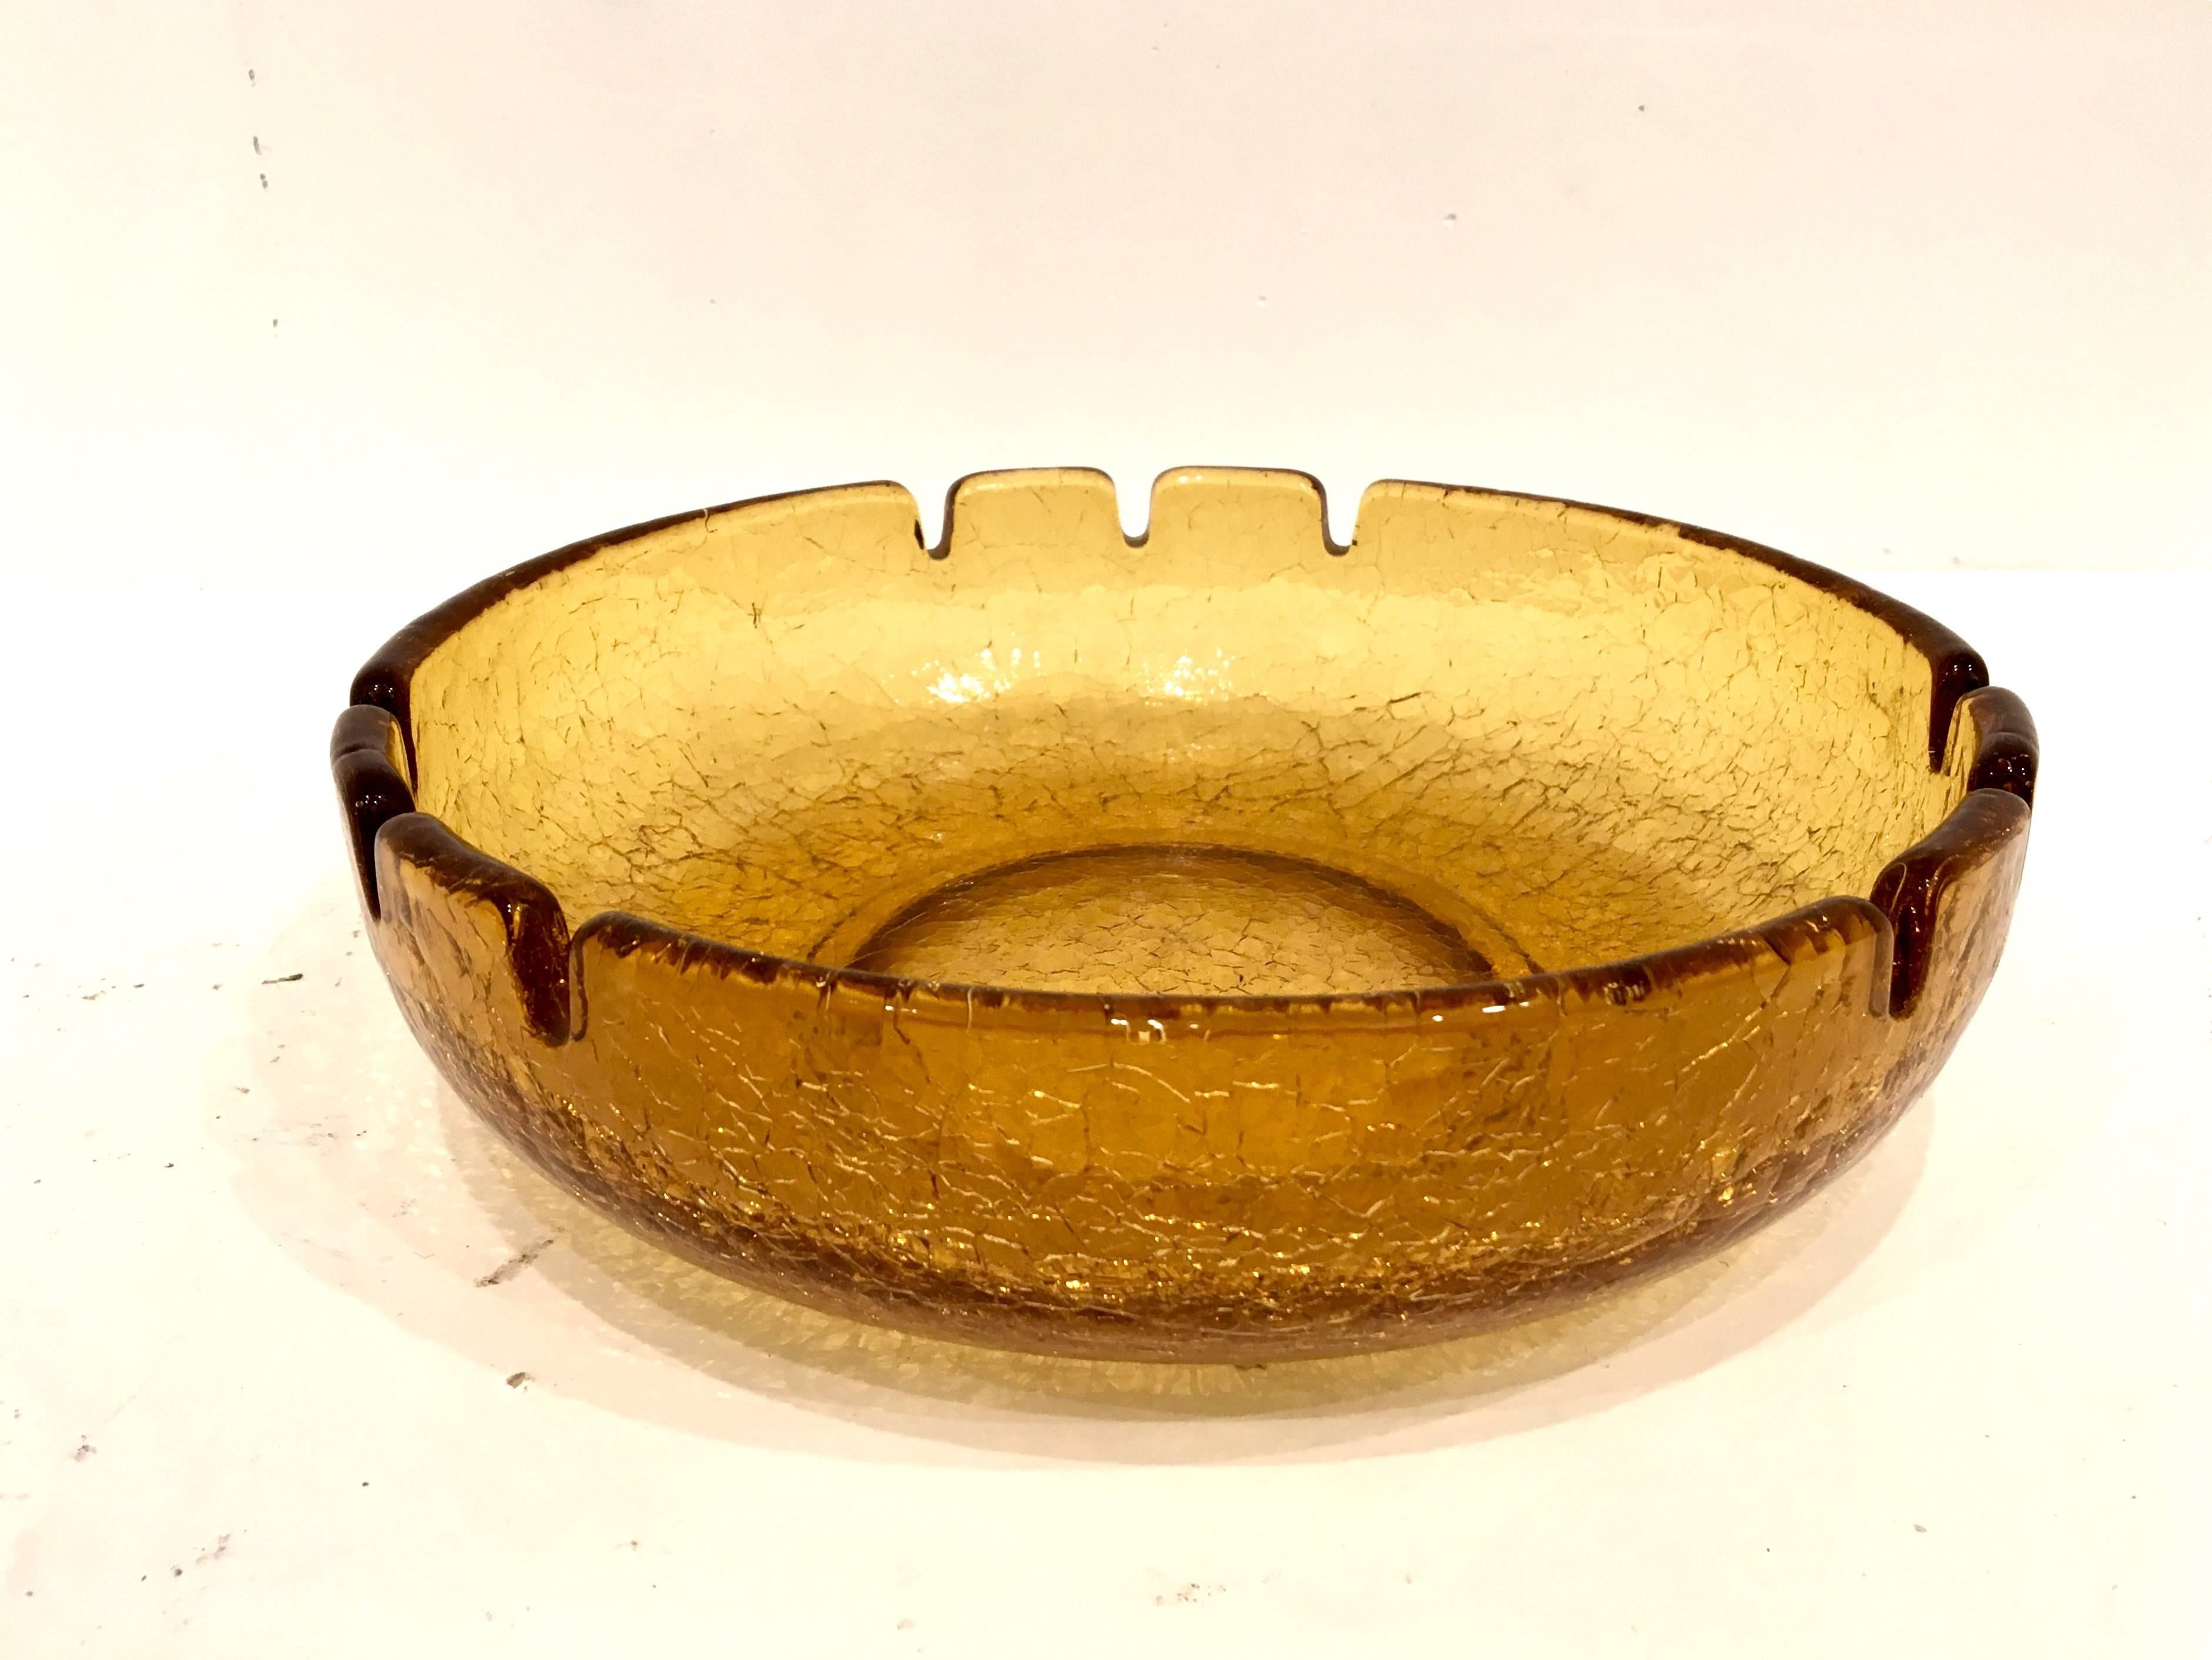 Iconic extra large glass ashtray by Blenko, with a crackle glass finish no chips or cracks excellent condition.